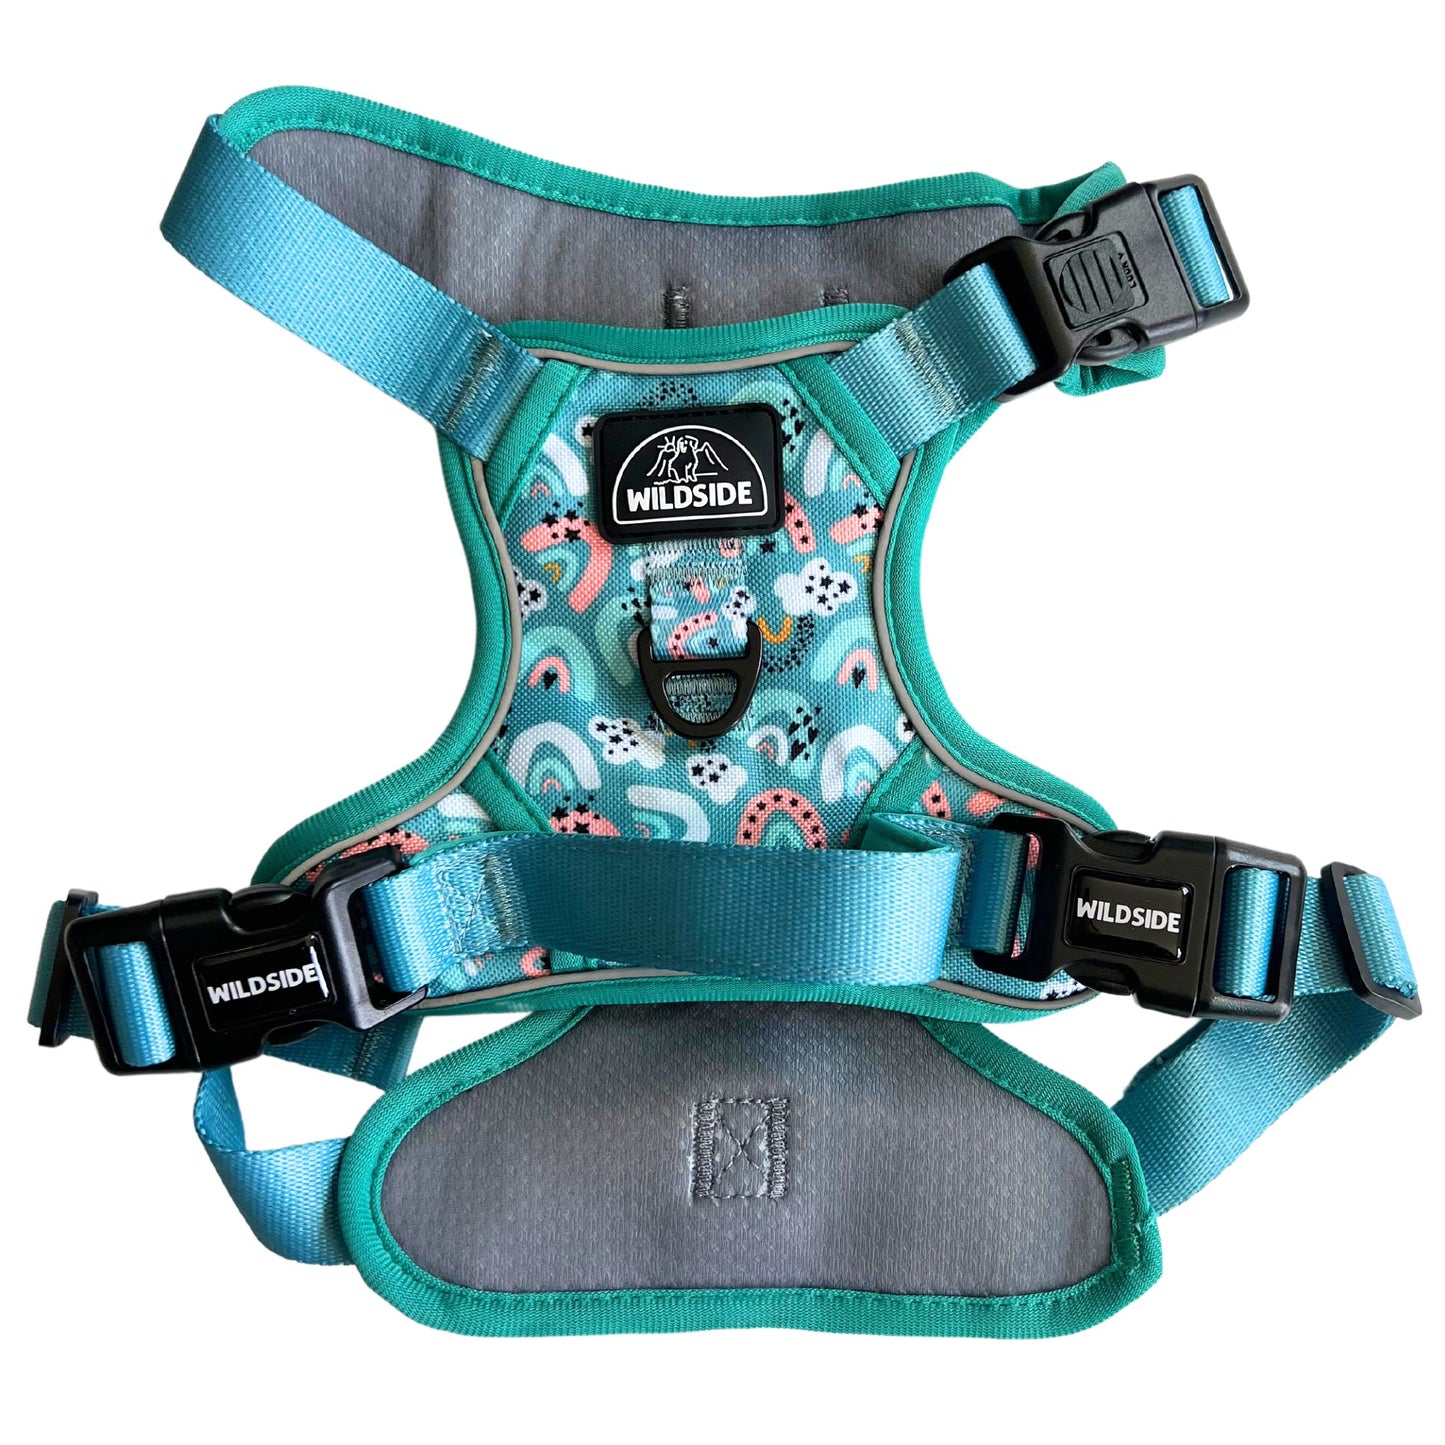 Cute dog harness, harness for golden retriever puppy, harness for dogs that pull, harness with handle, no slip over the head harness, mint harness, green harness, cutest harness, best dog harness, front harness vs back harness